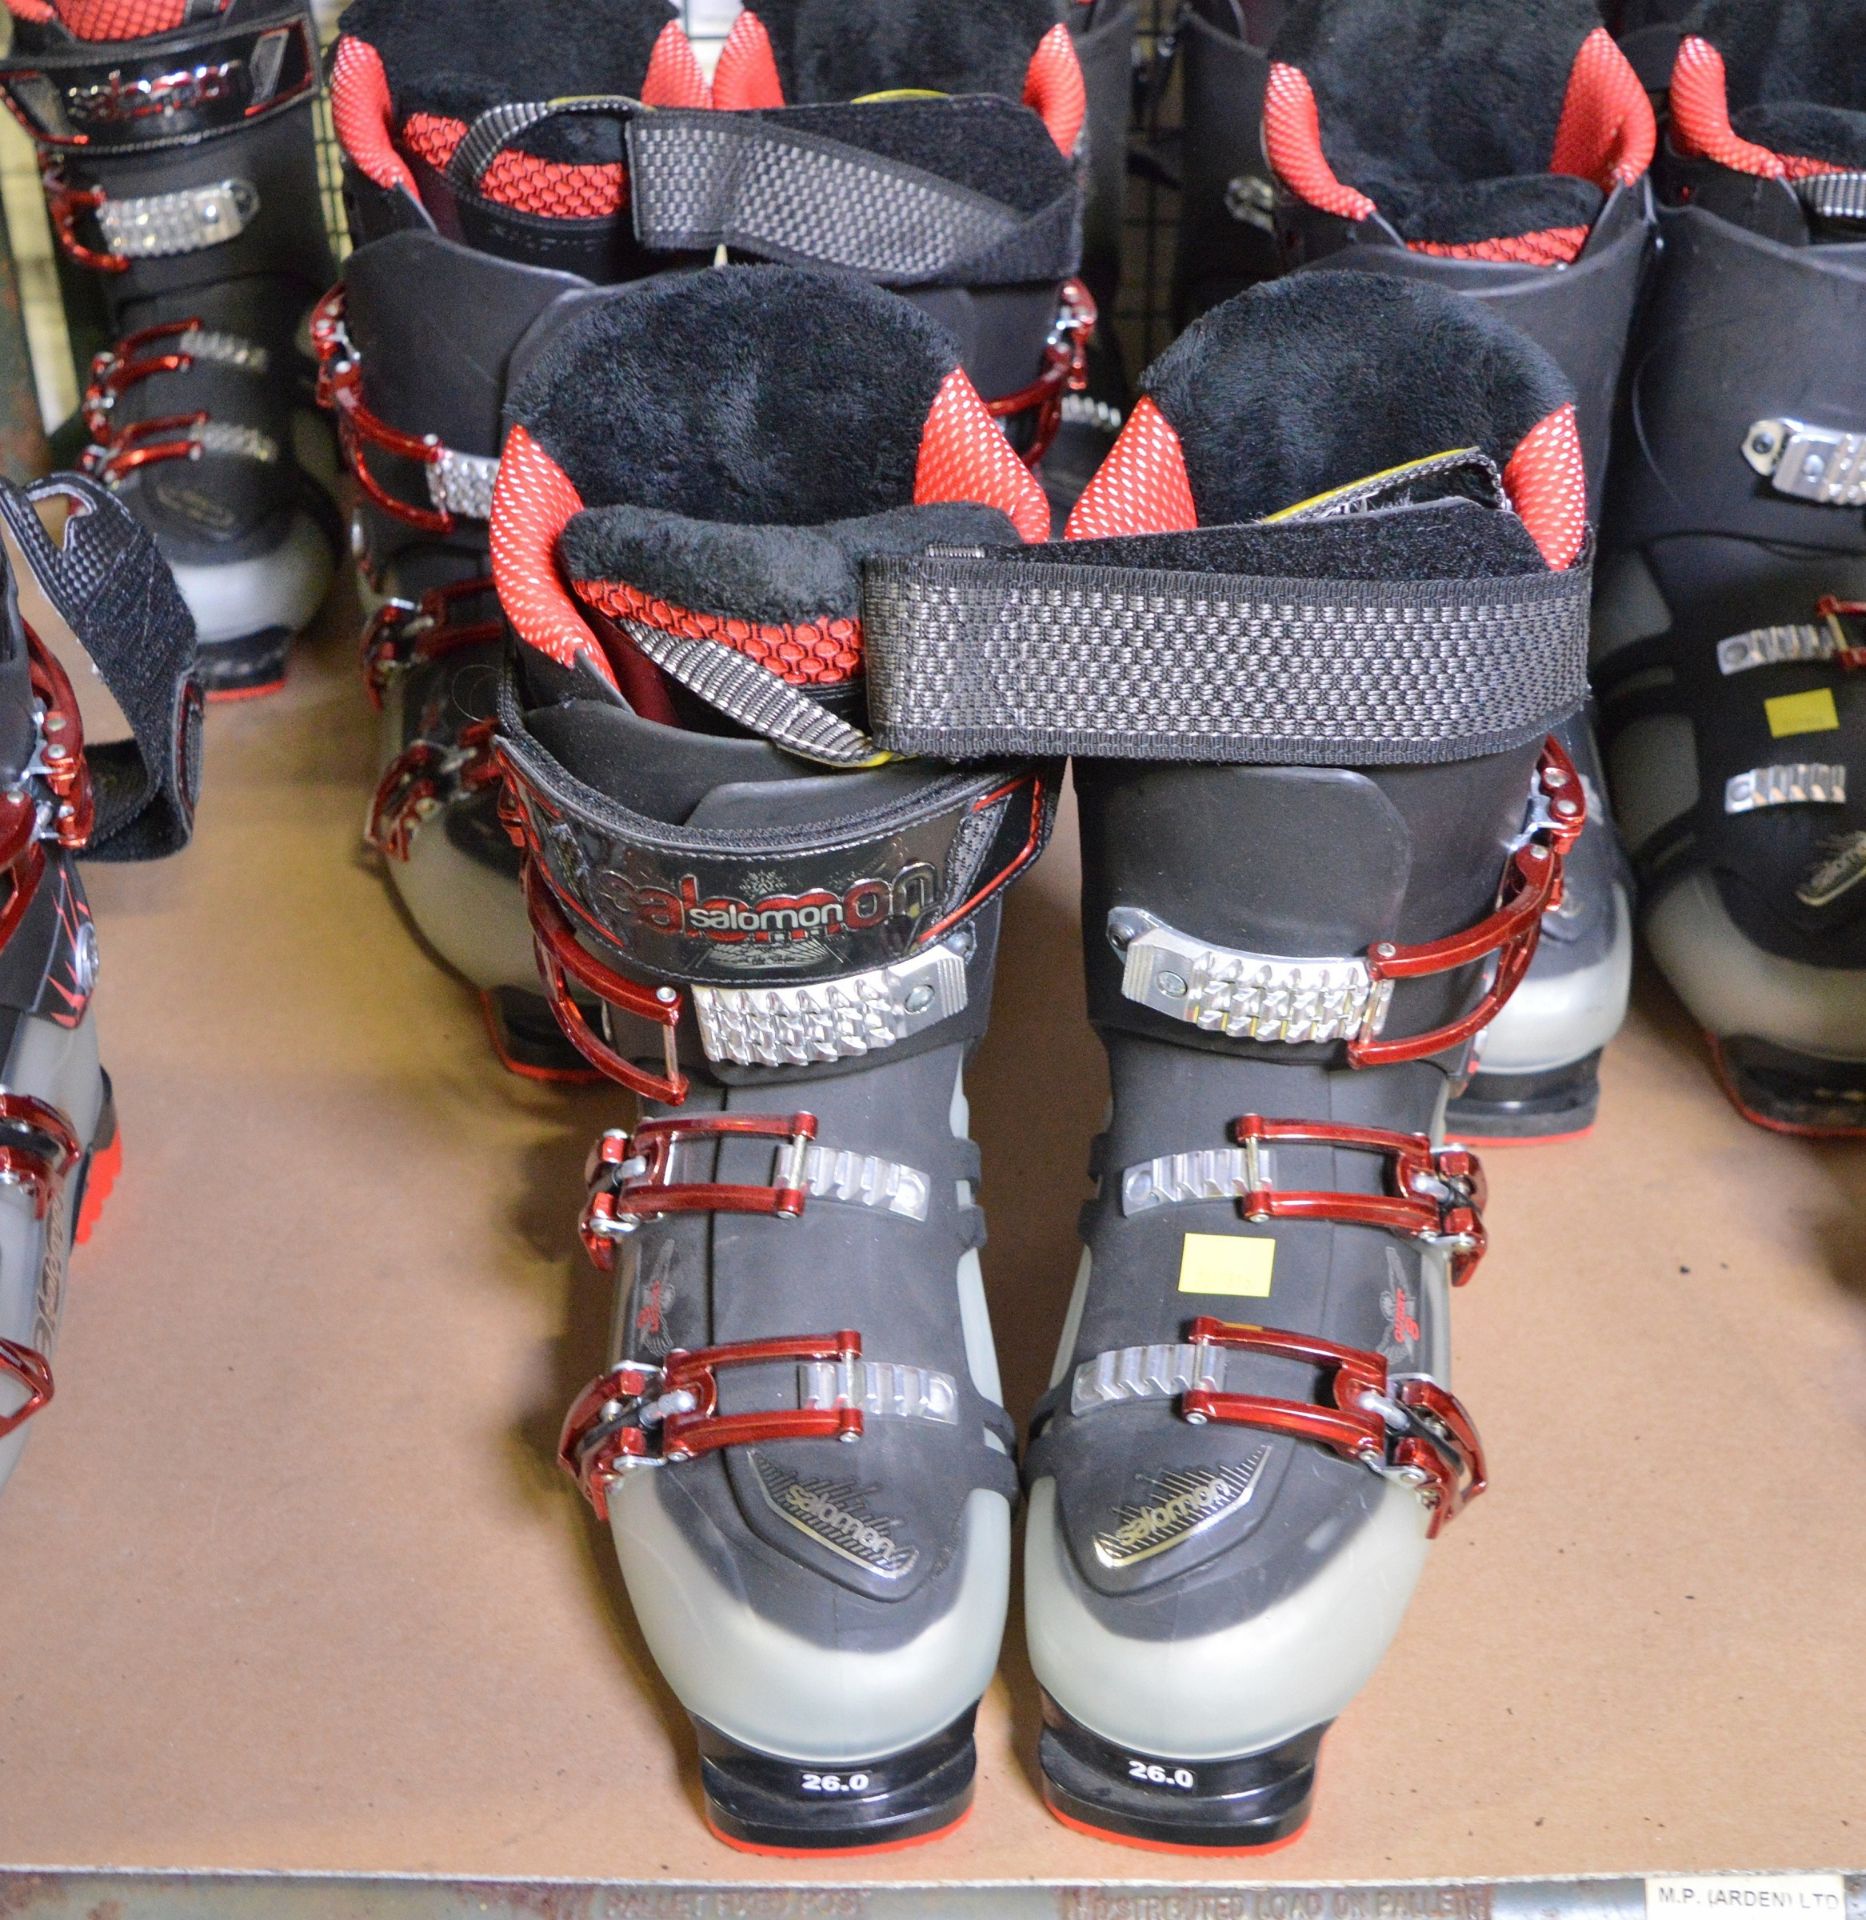 8x Pairs of Ski Boots - various makes & sizes - Image 2 of 4